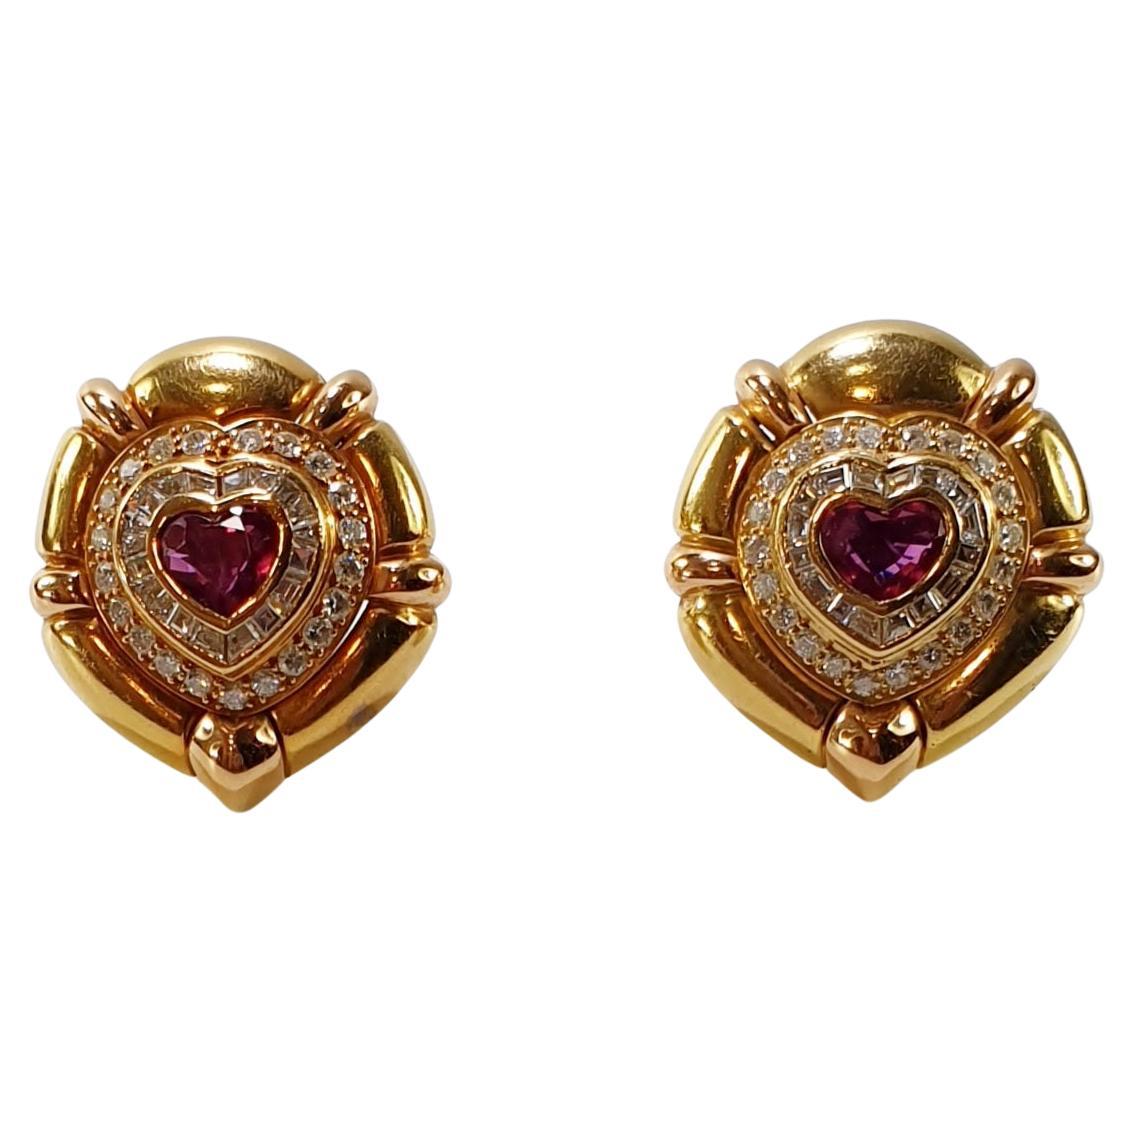 Pradera 18k gold Bulgary style Earrings with Diamonds and Burma Heart Ruby
Weight: 26,8 grams
Diamonds 42 round 0,10ct aprox 4cts of H/ VVS 
Dimonds 32 baguettes of 0,07  total aprox 2.24cts of H/VVS
Central Burma Heart Shape ruby of 2ct each